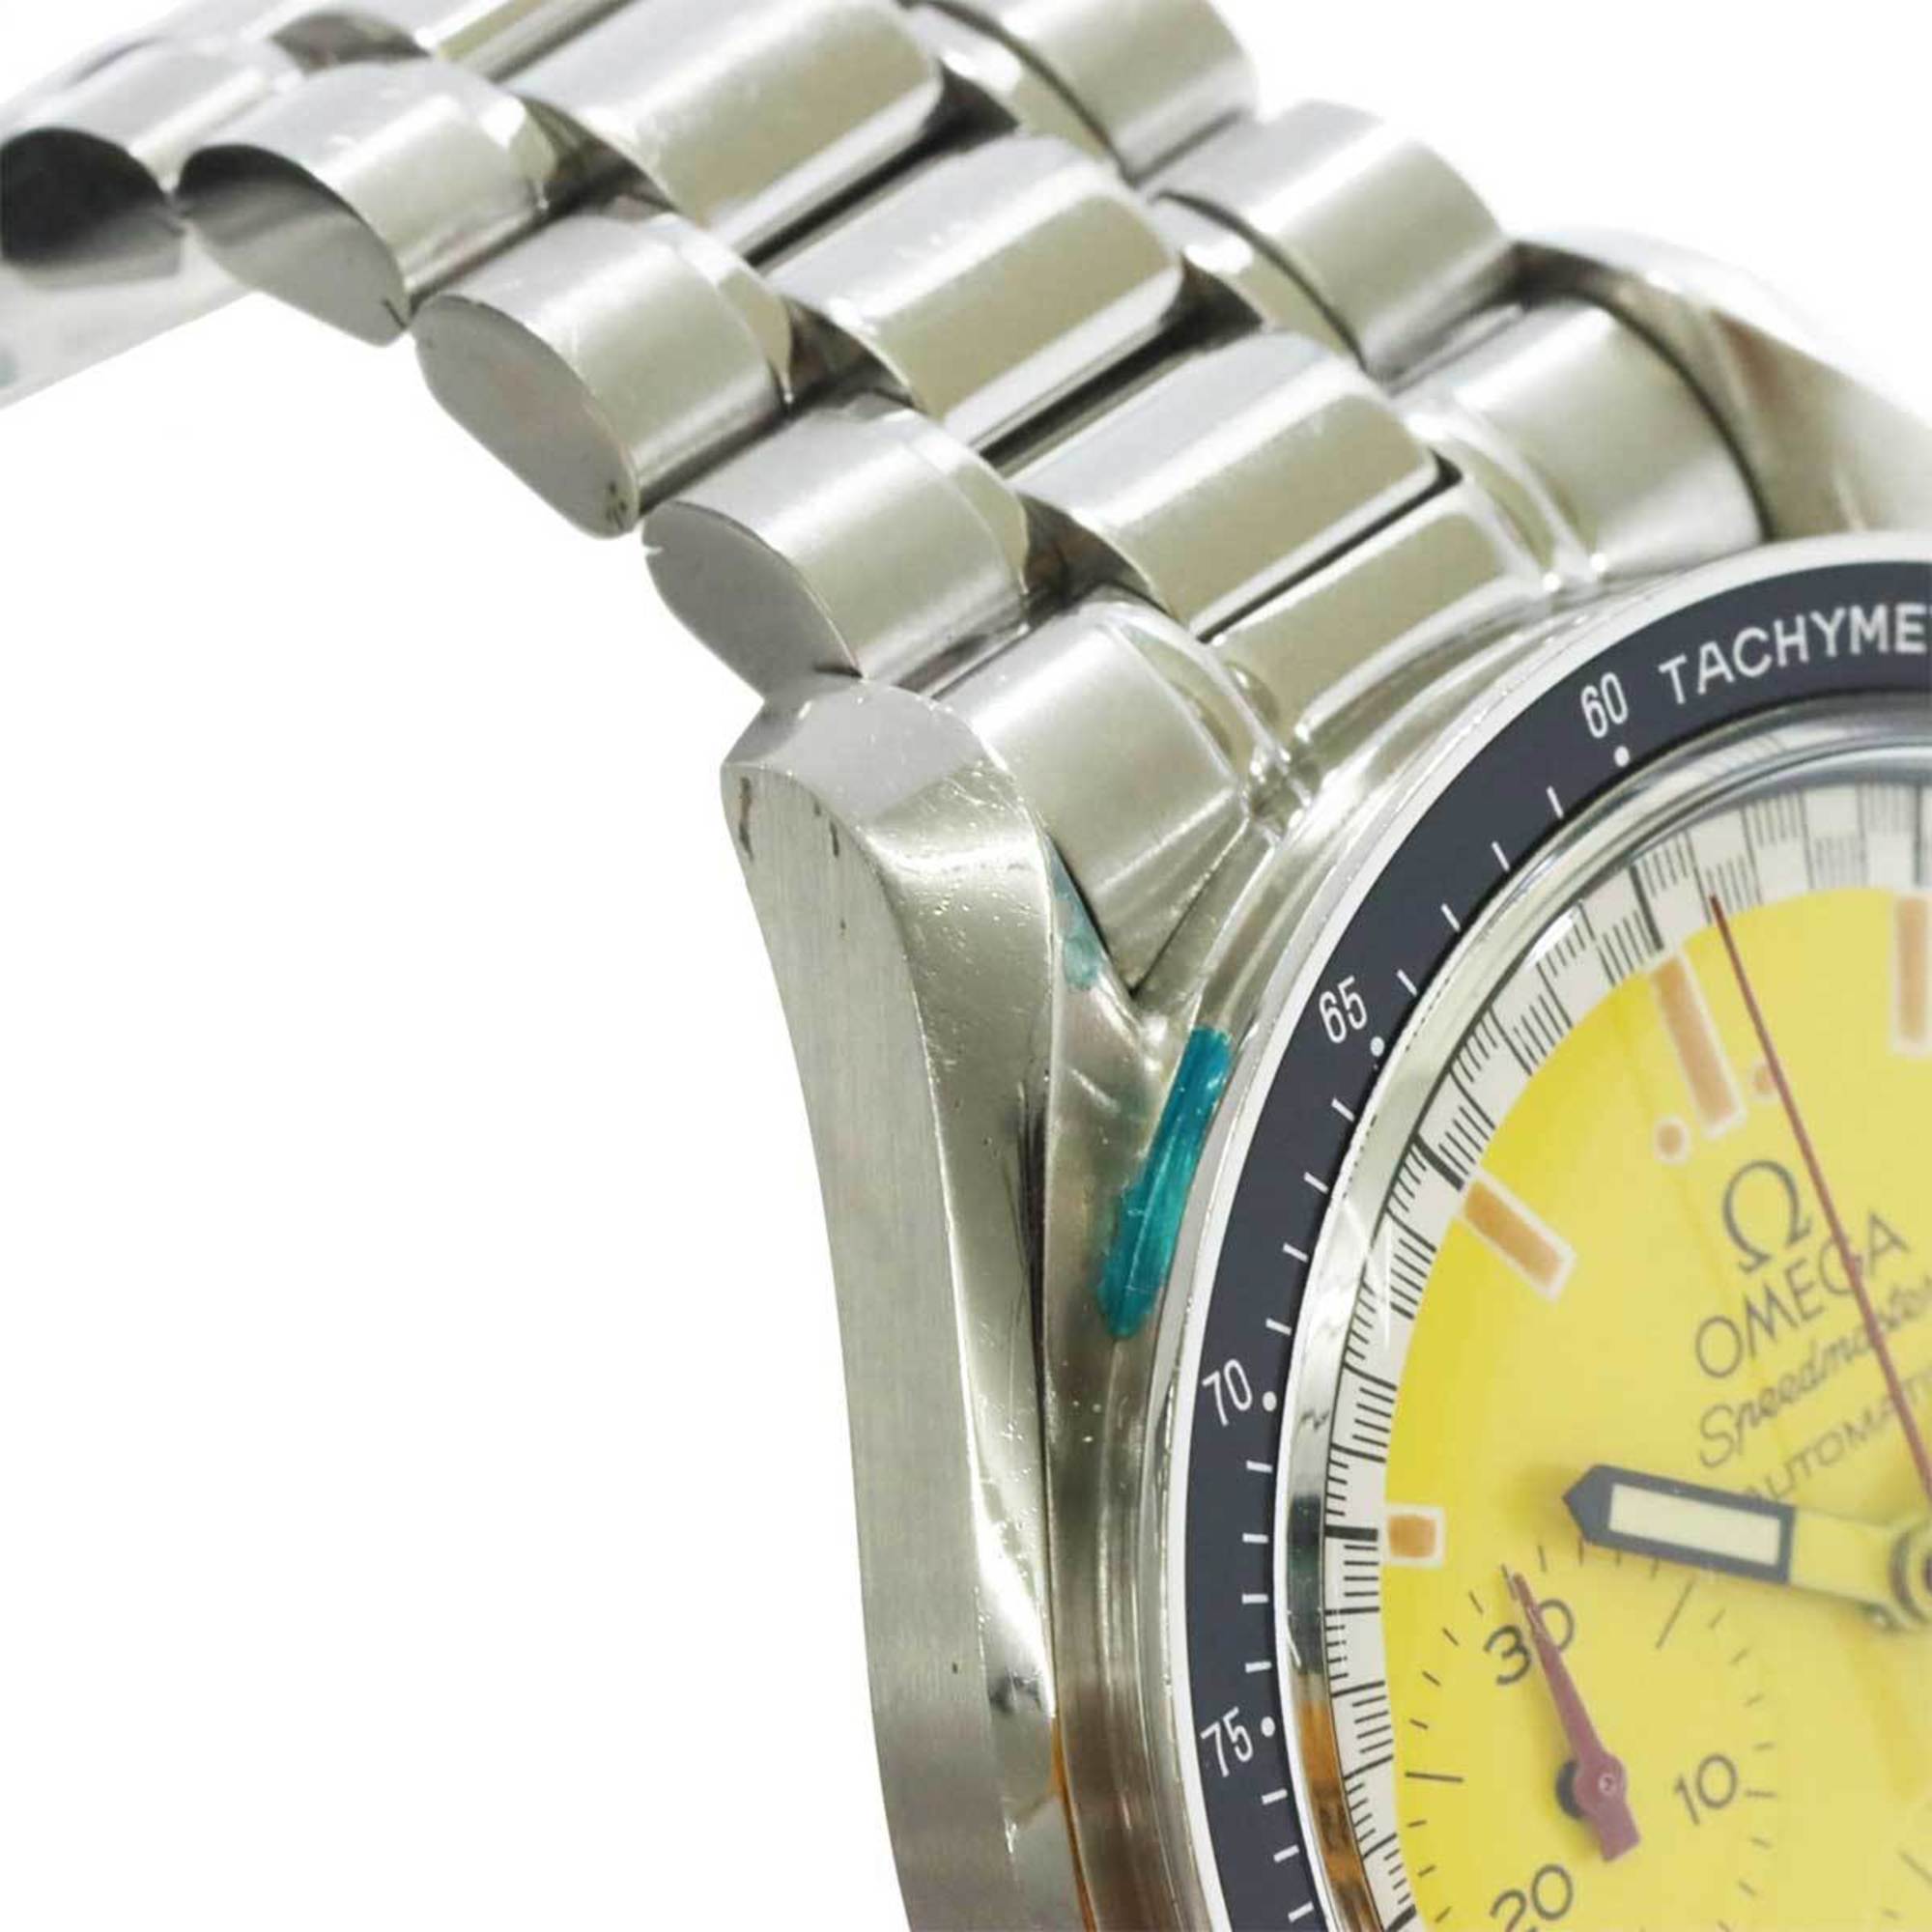 Omega OMEGA Speedmaster Racing Schumacher Limited 3510 12 Chronograph Men's Watch Yellow Dial Automatic